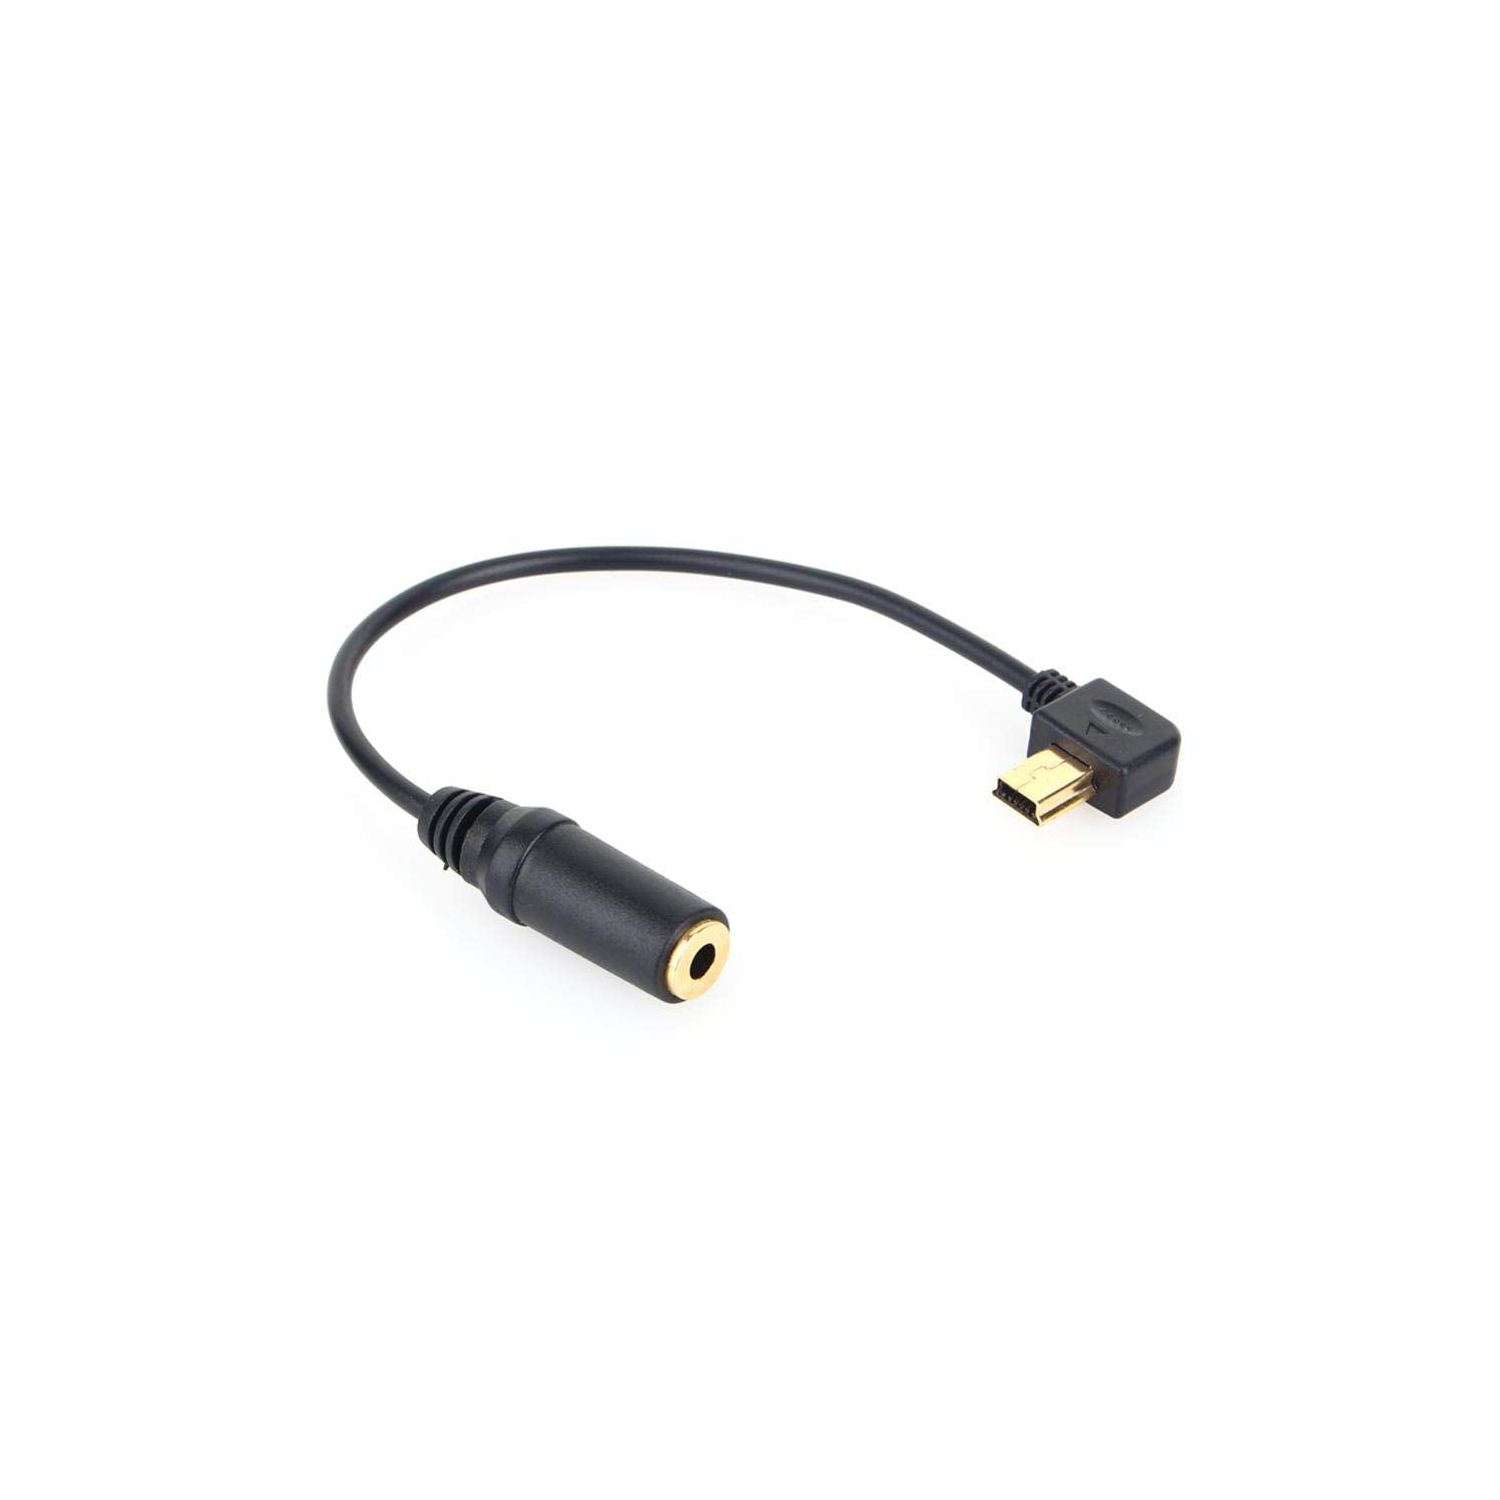 Microphone Audio Adapter, USB to 3.5mm Jack Audio Microphone MIC Link Adapter Connector Cable Wire for GoPro Hero 3 3+